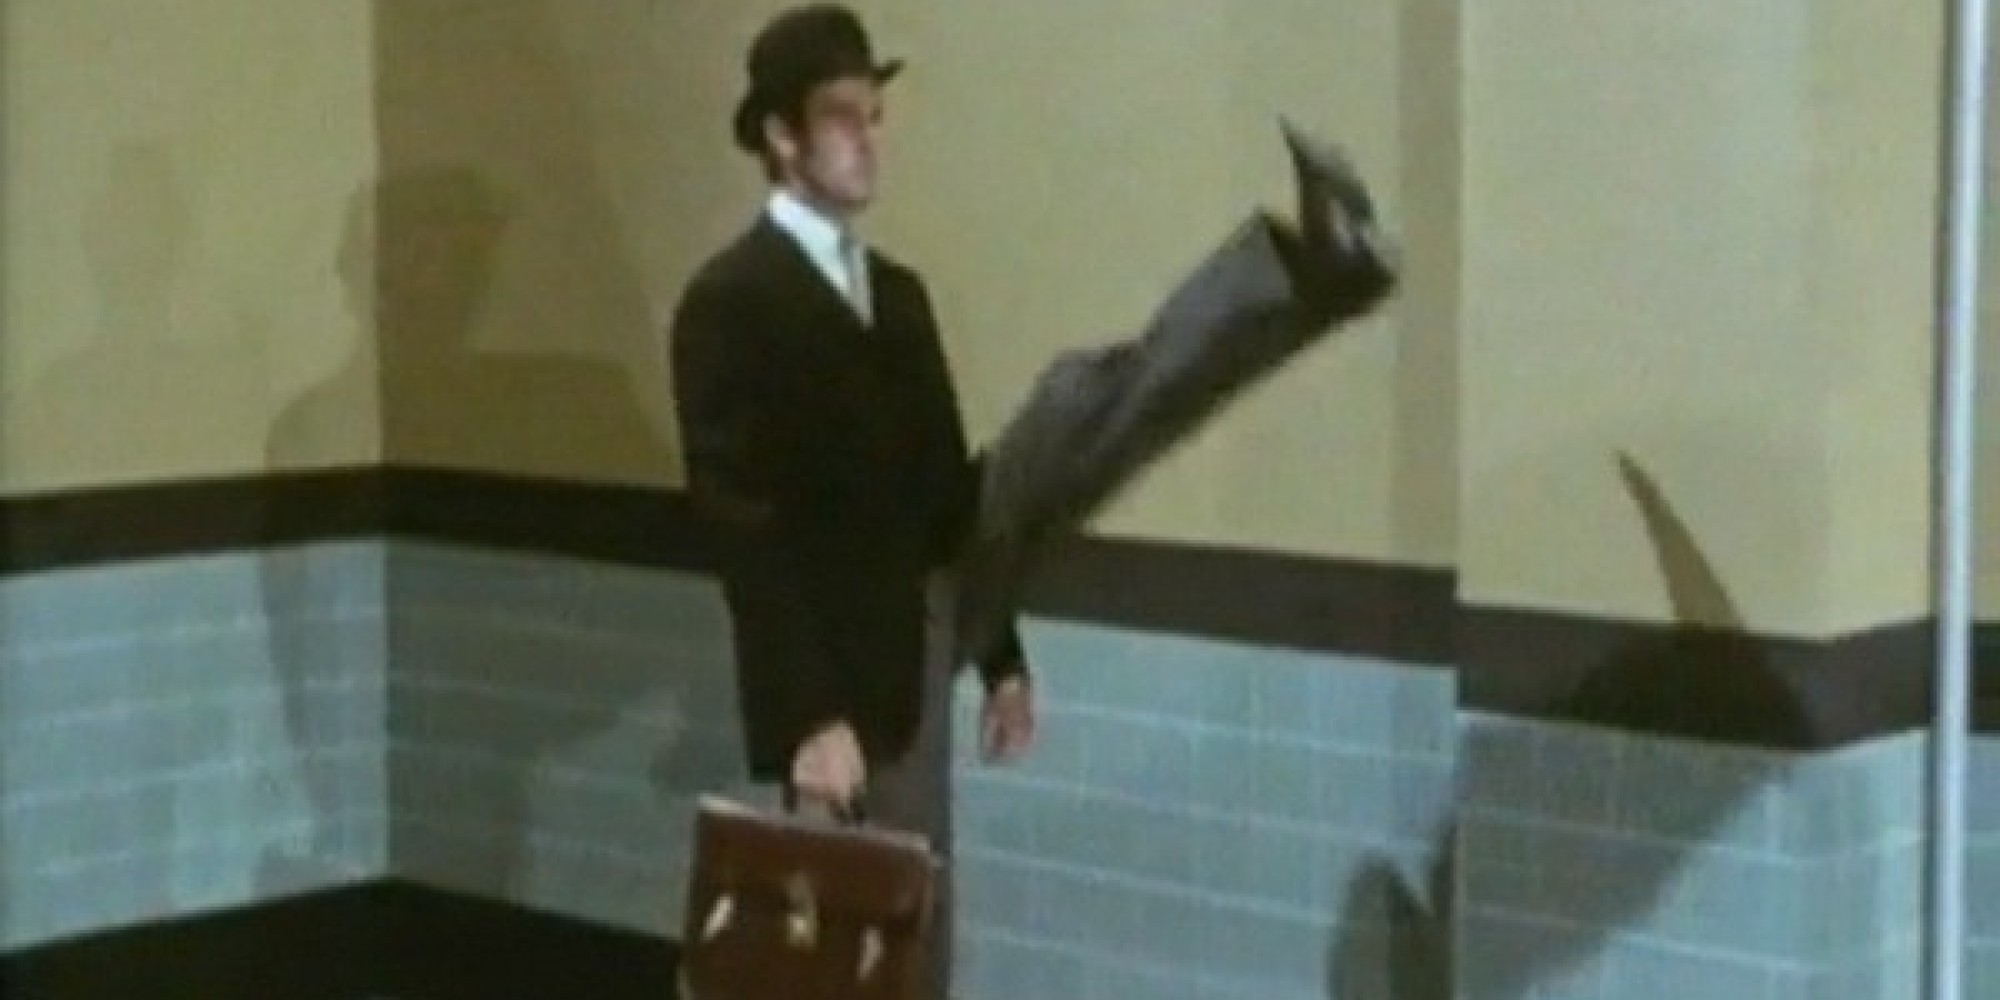 Monty Python Reunion Gigs Kick Off Tonight, But John Cleese's 'Ministry Of Silly Walks ...